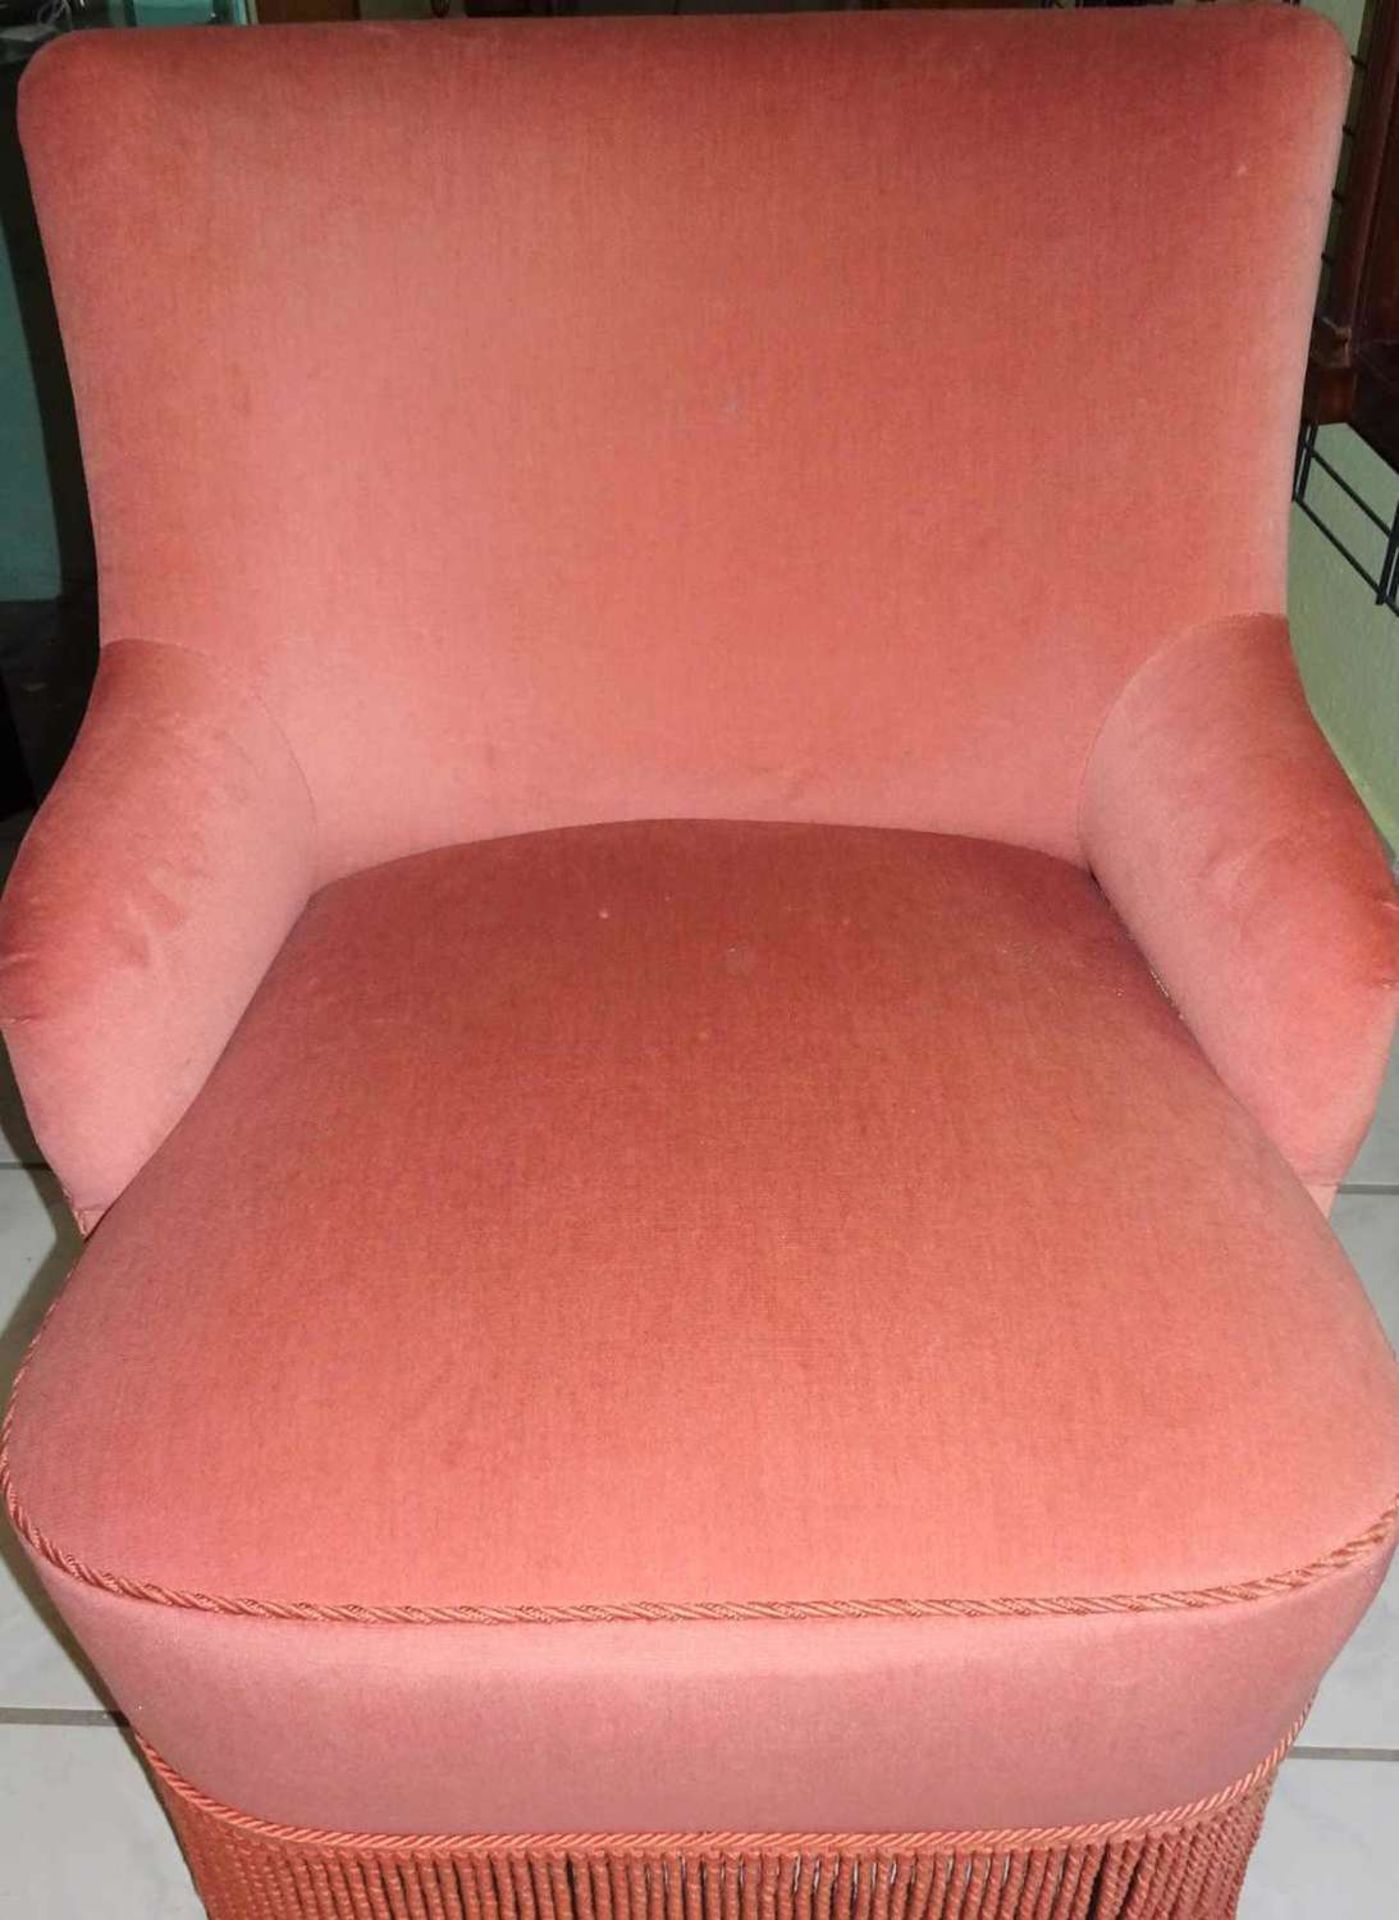 Cocktailsessel / Clubsessel, 50/60er Jahre. Farbe: Rot. Sehr guter Zustand. Maße: Höhe ca. 76 cm,